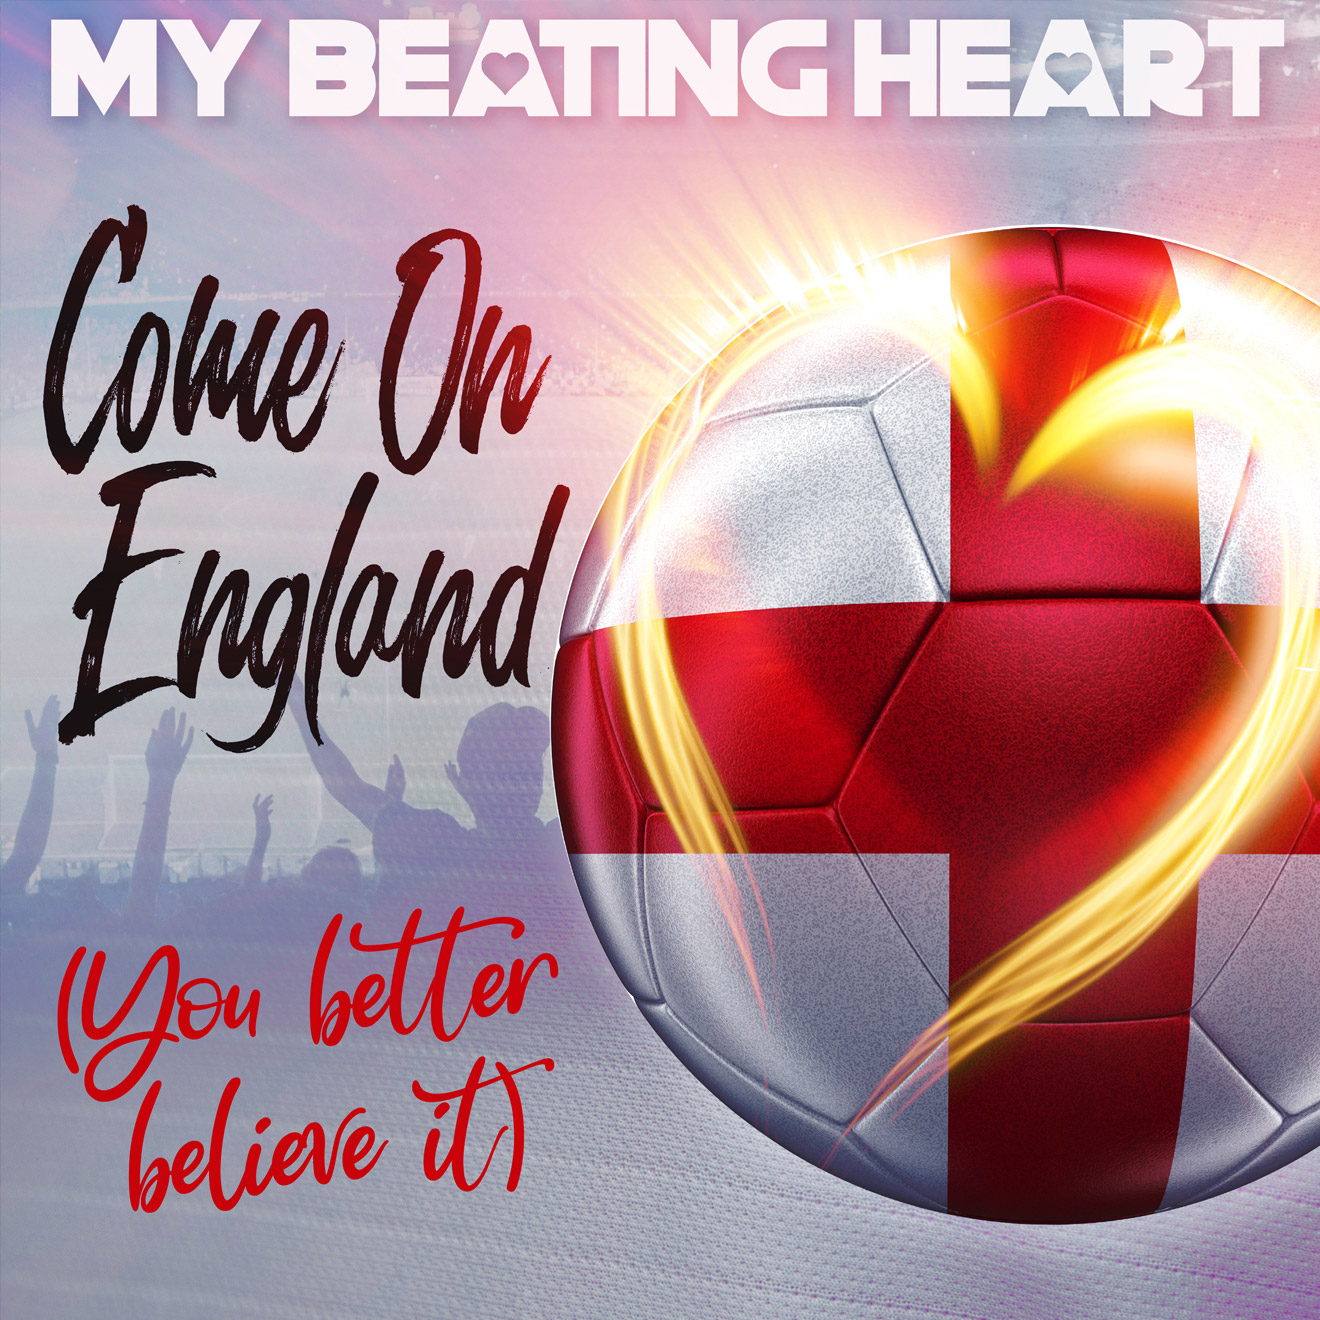 my beating heart - football record cover design